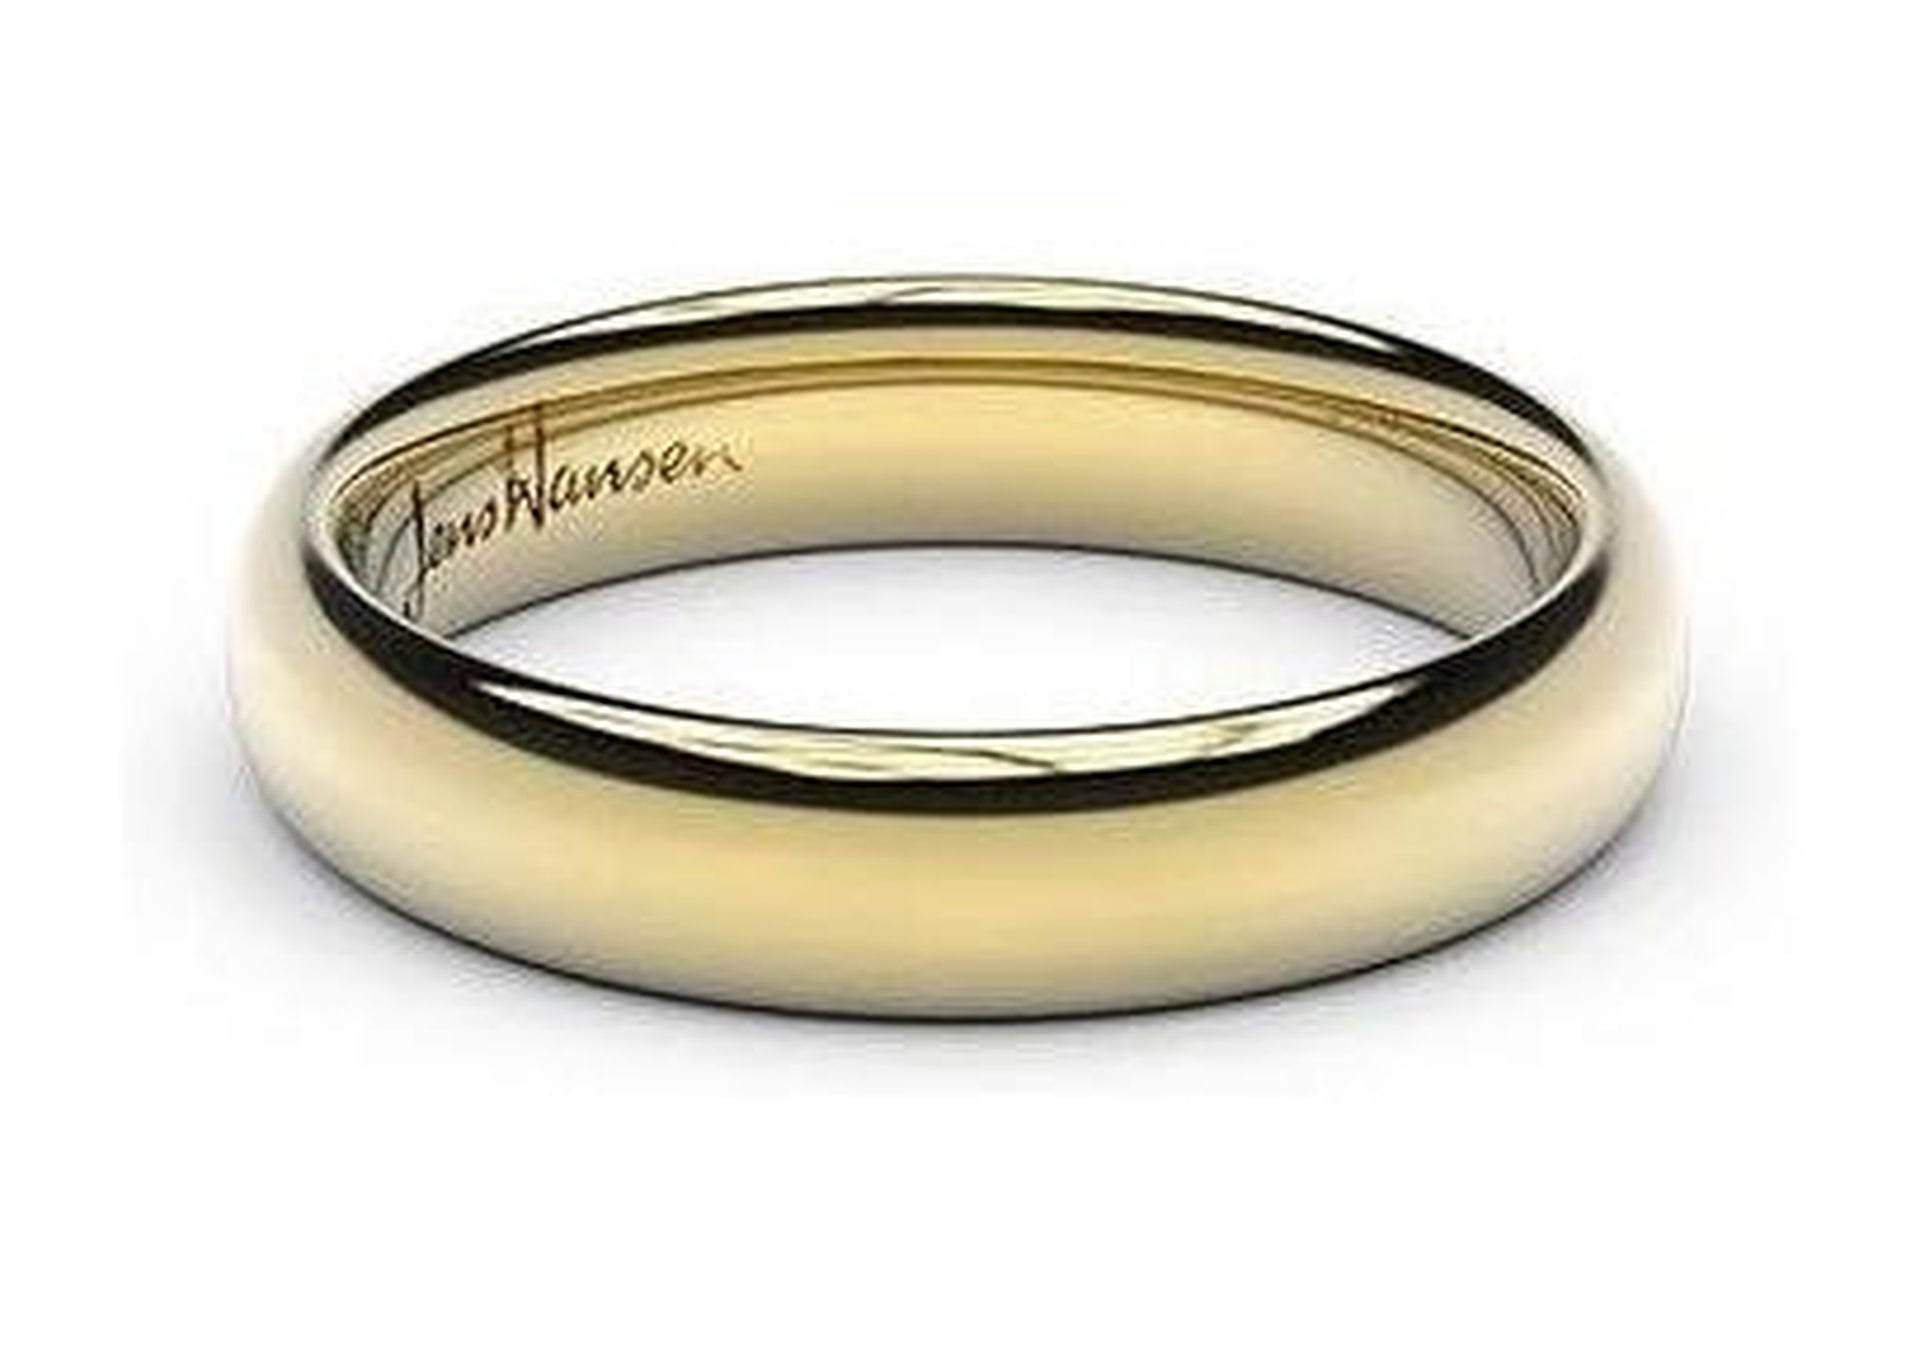 Petite Replica Ring - 4mm wide, 22ct Yellow Gold